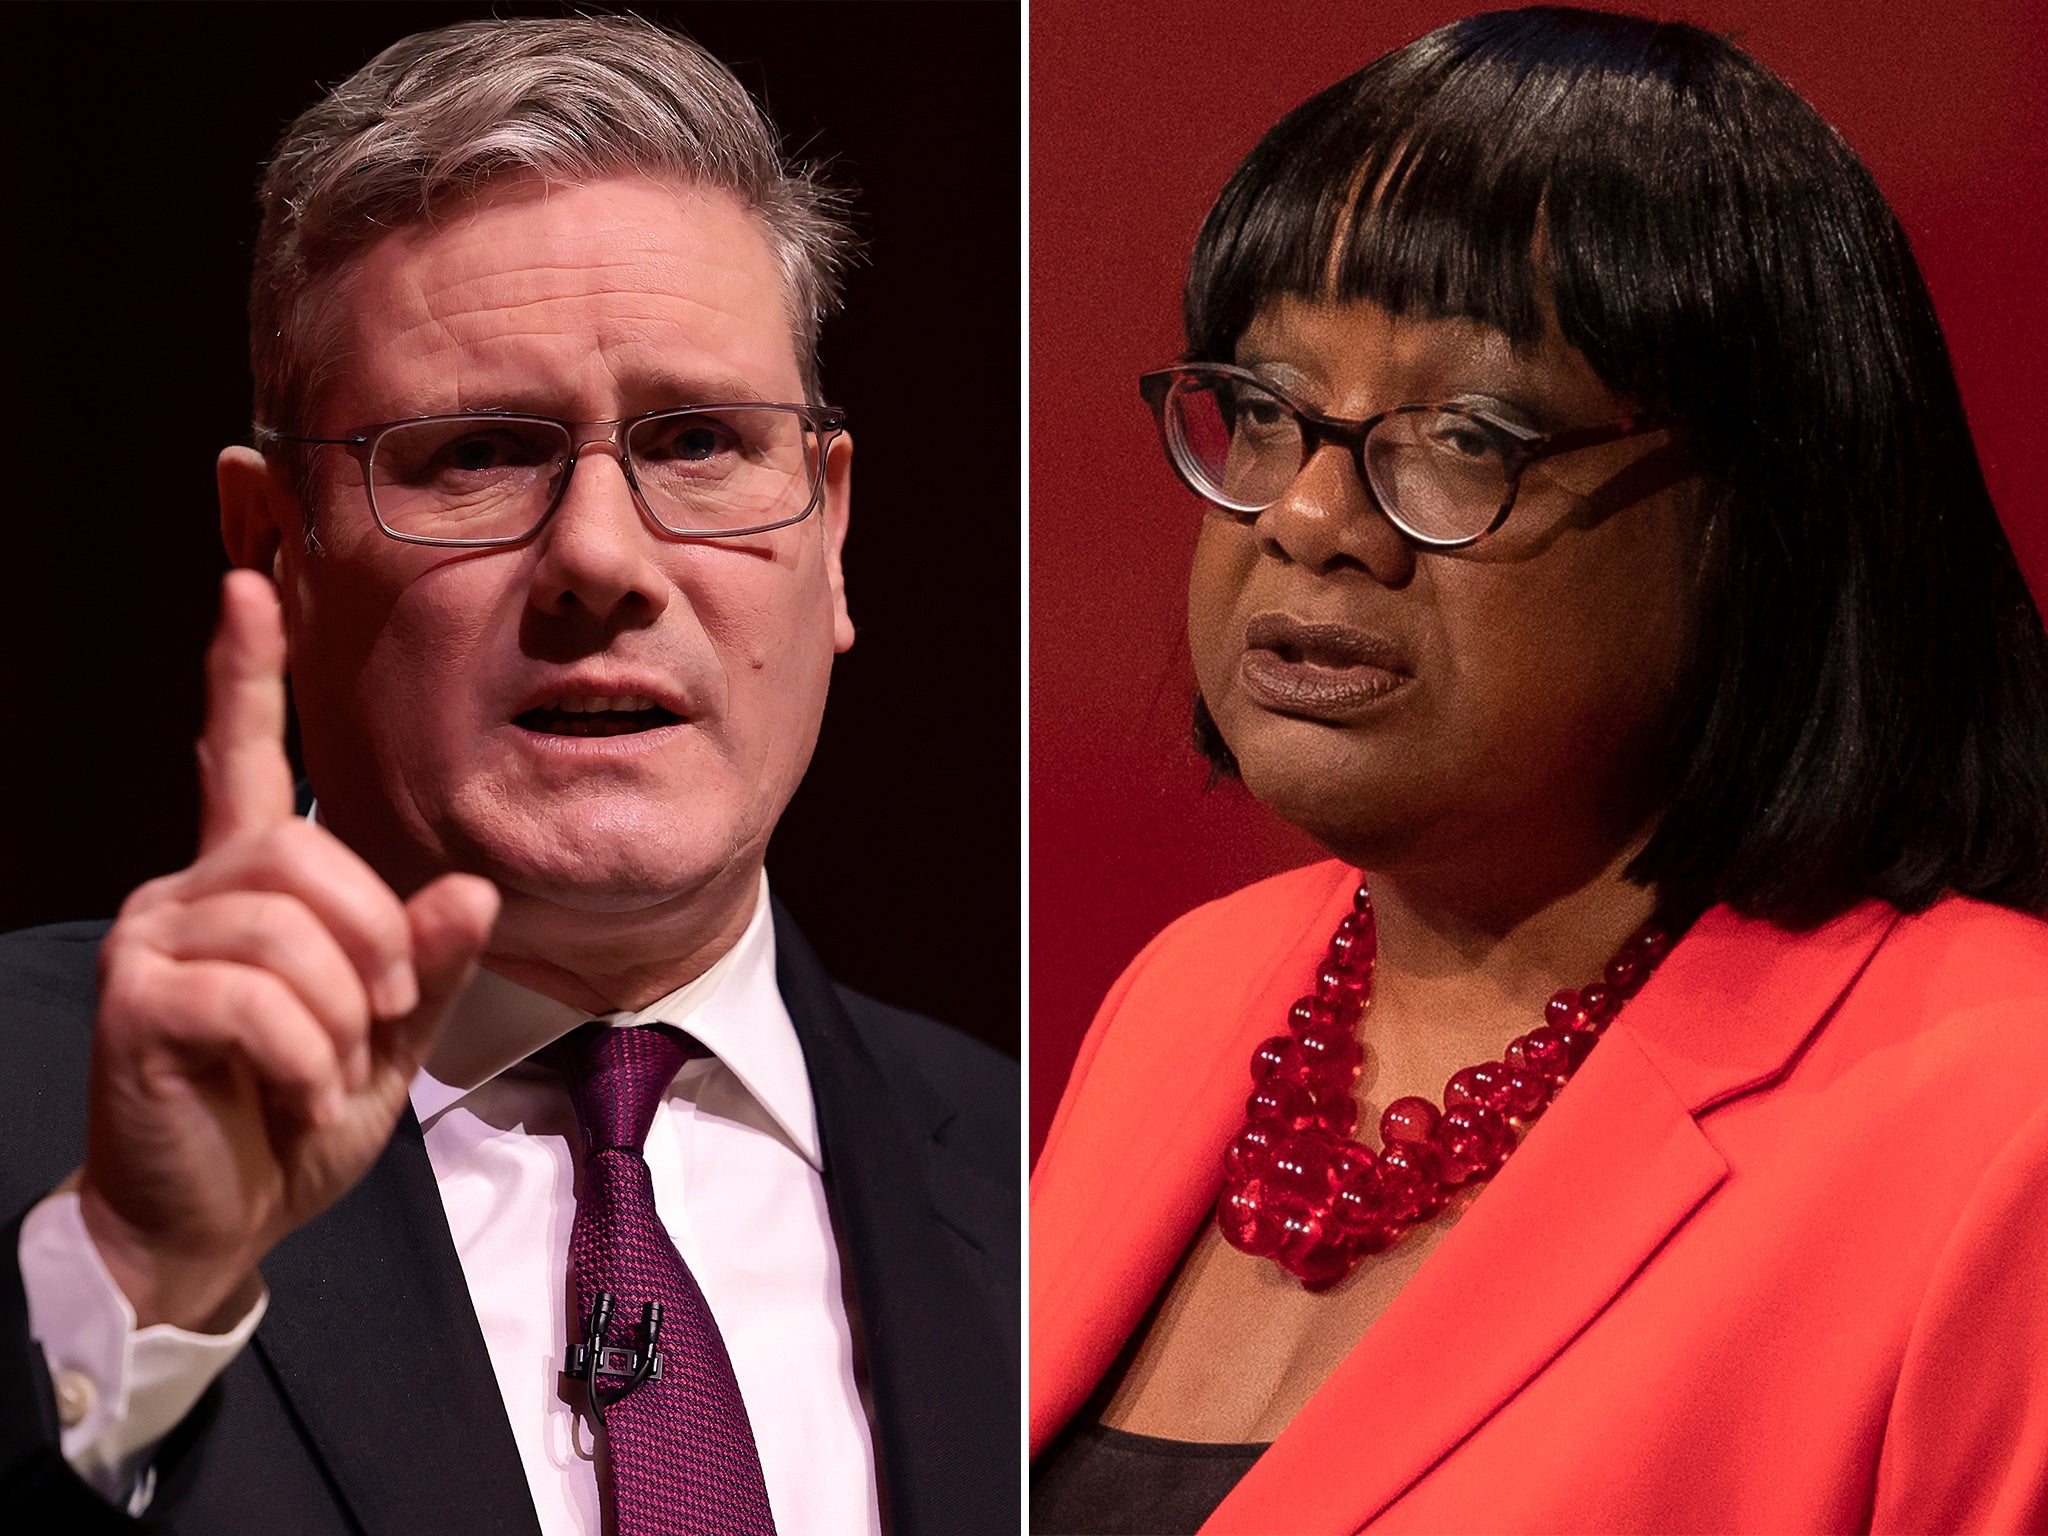 Abbott has attacked Starmer and Labour over racism in the party